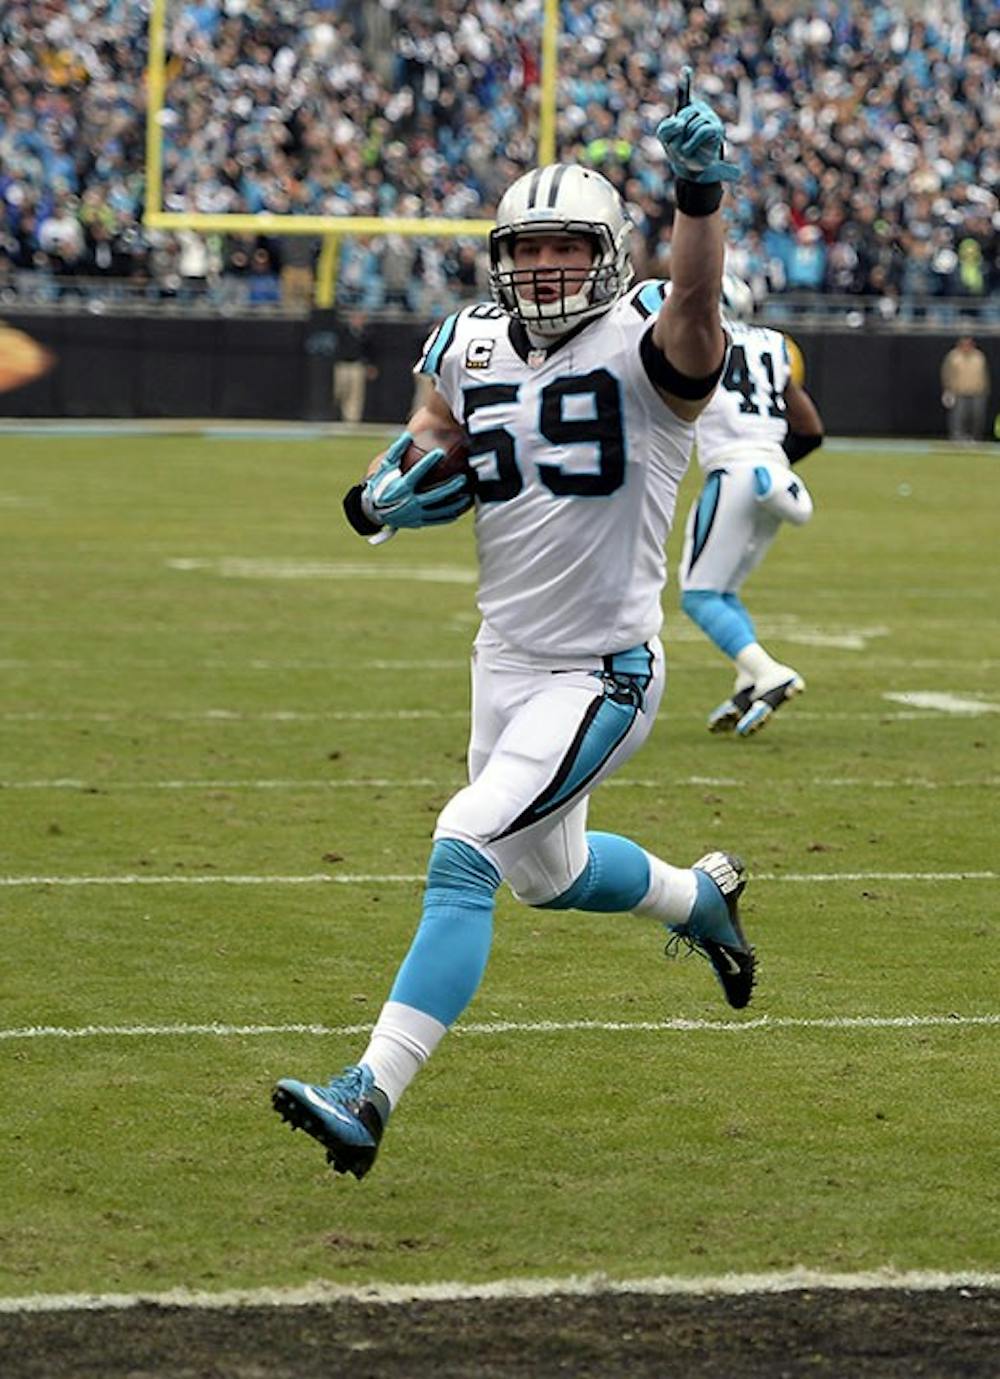 Carolina Panthers&apos; Luke Kuechly (59) celebrates as he returns an interception for a touchdown during the first quarter on Sunday, Jan. 17, 2016, at Bank of America Stadium in Charlotte, N.C. (David T. Foster III/Charlotte Observer/TNS)